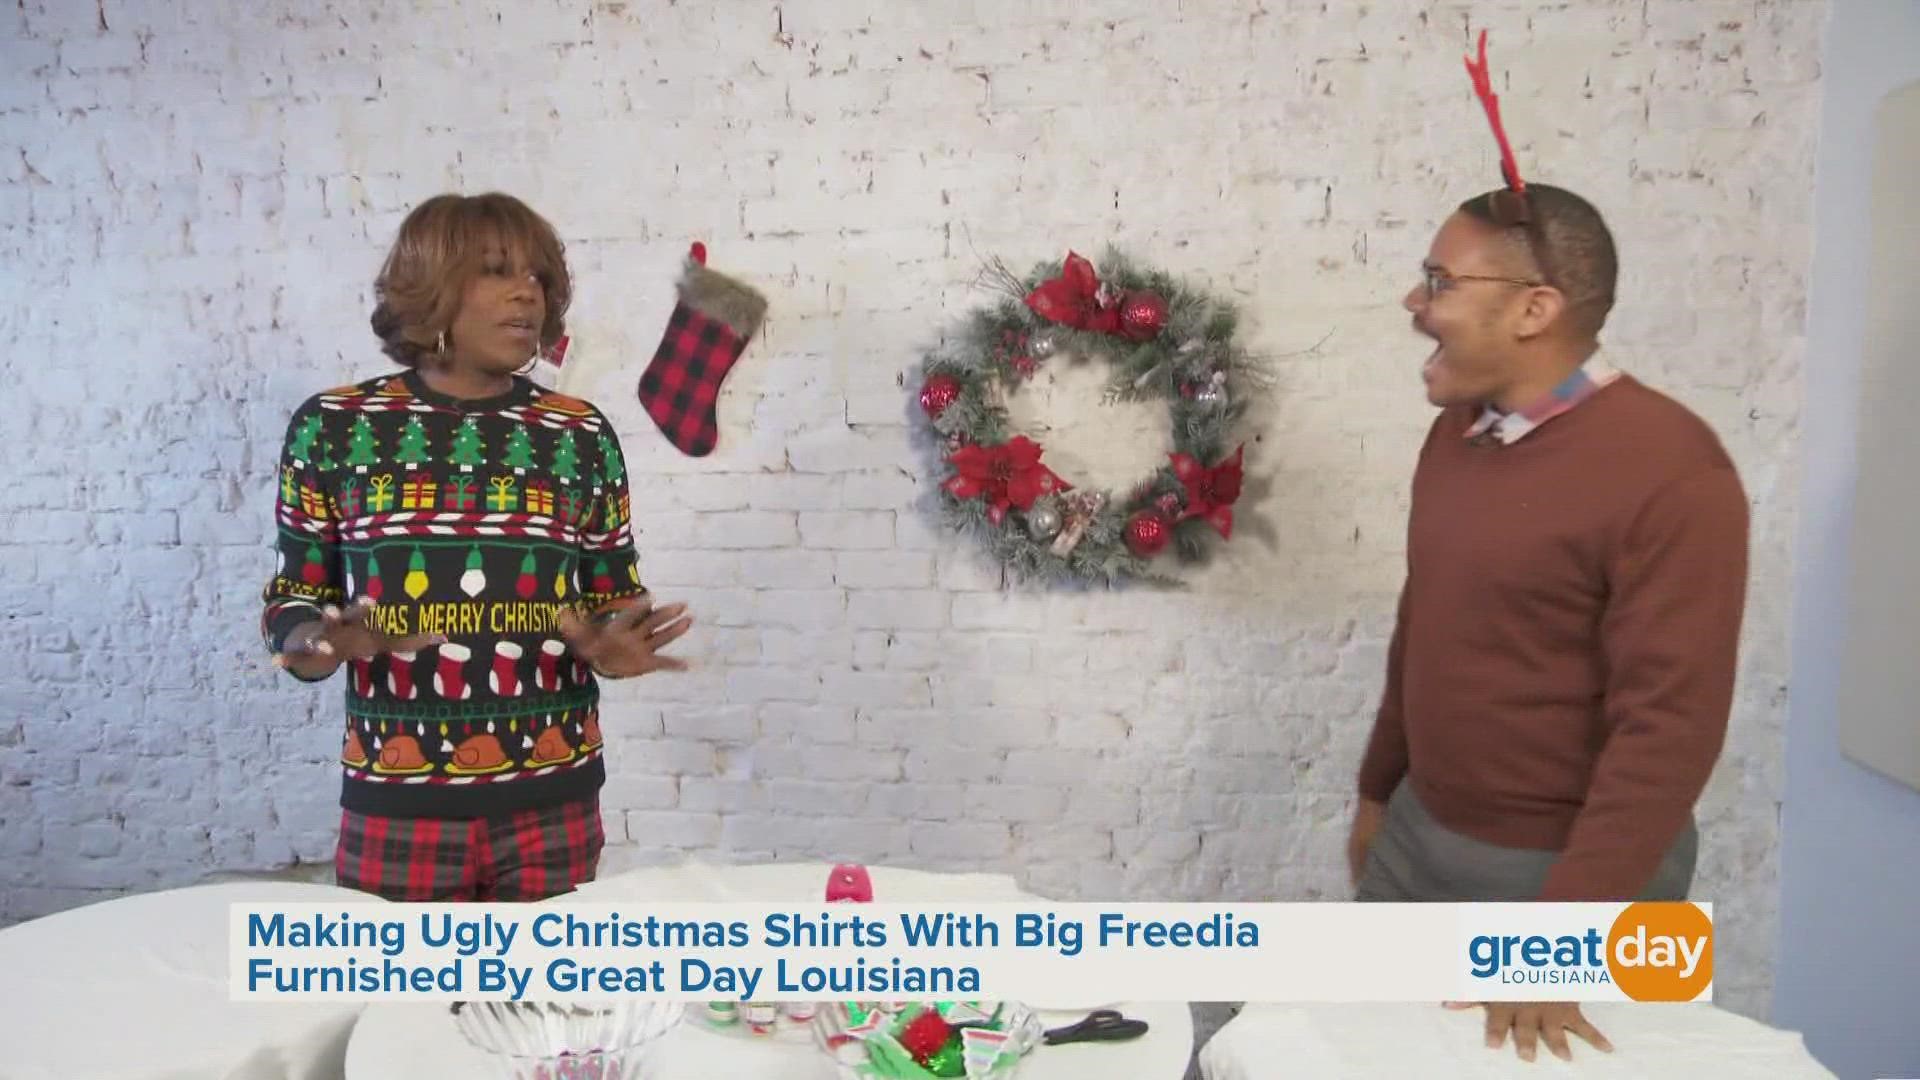 Queen of bounce, Big Freedia, and Malik Mingo make ugly Christmas t-shirts in honor of the holidays. They also discussed Big Freedia's Christmas music.